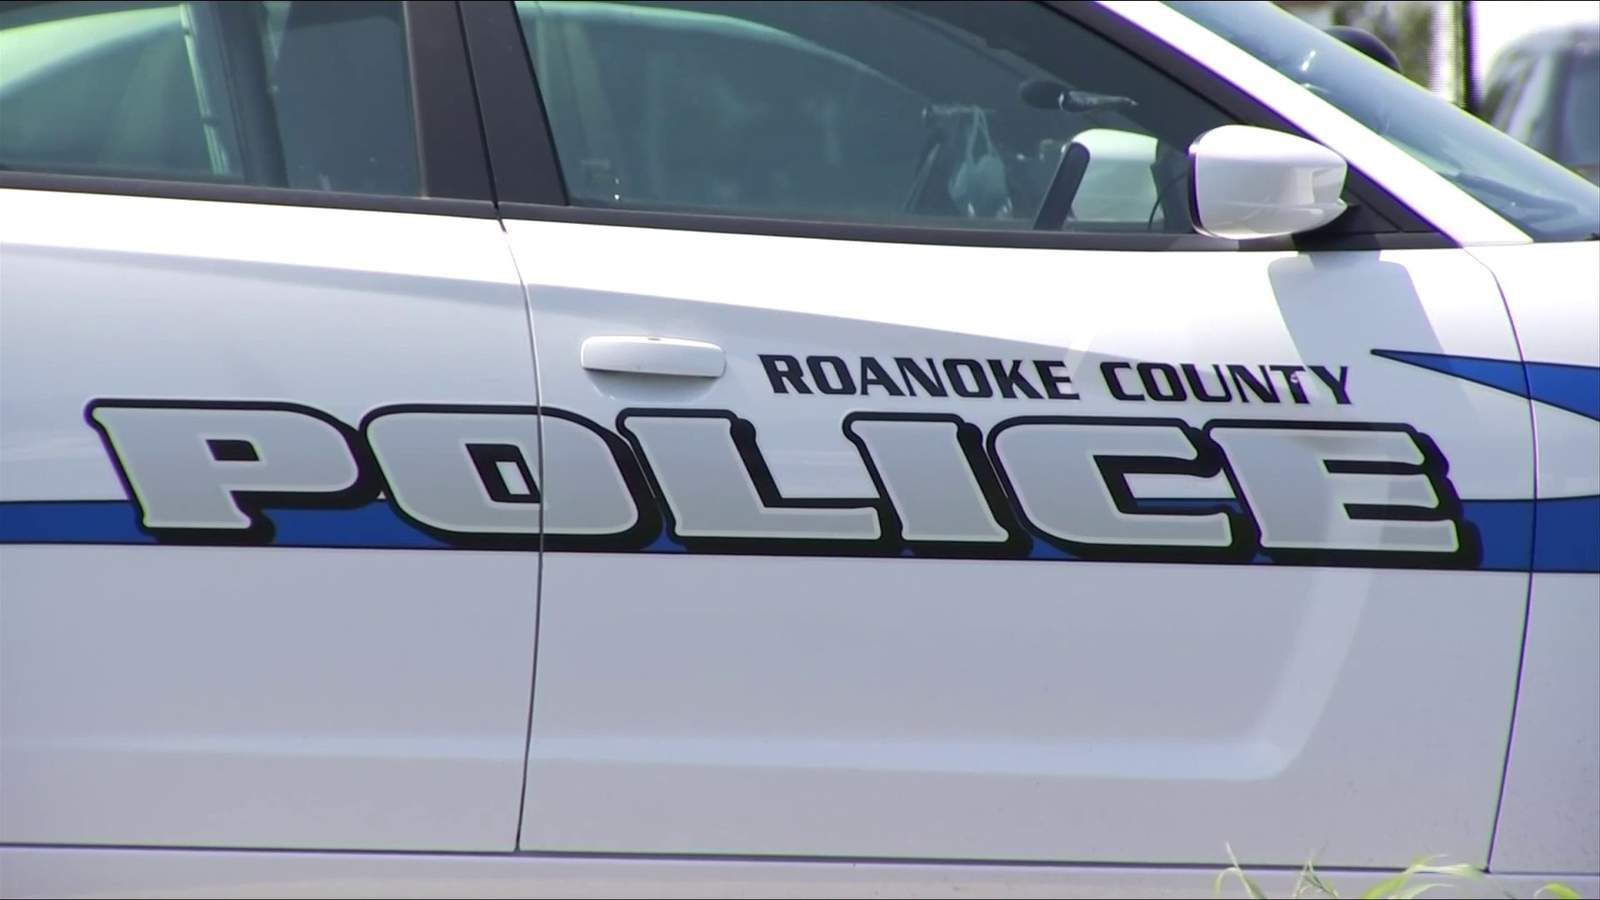 3 detained after workers report being shot at in Roanoke County